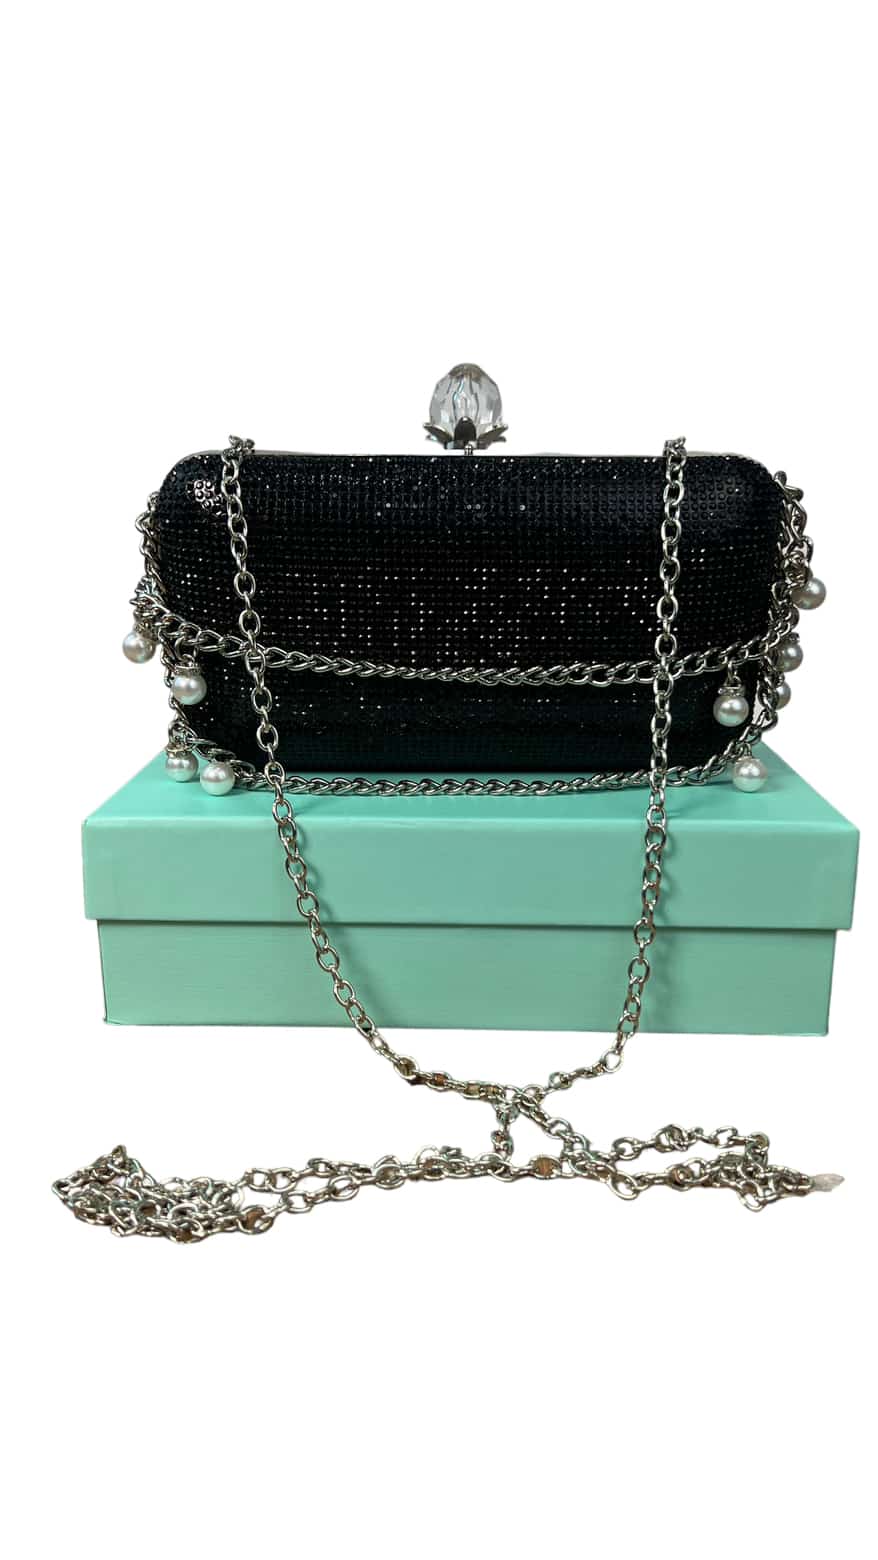 CHRISBELLA BLACK DOUBLE-HANDLE PEARL EMBELLISHED CLUTCH PURSE